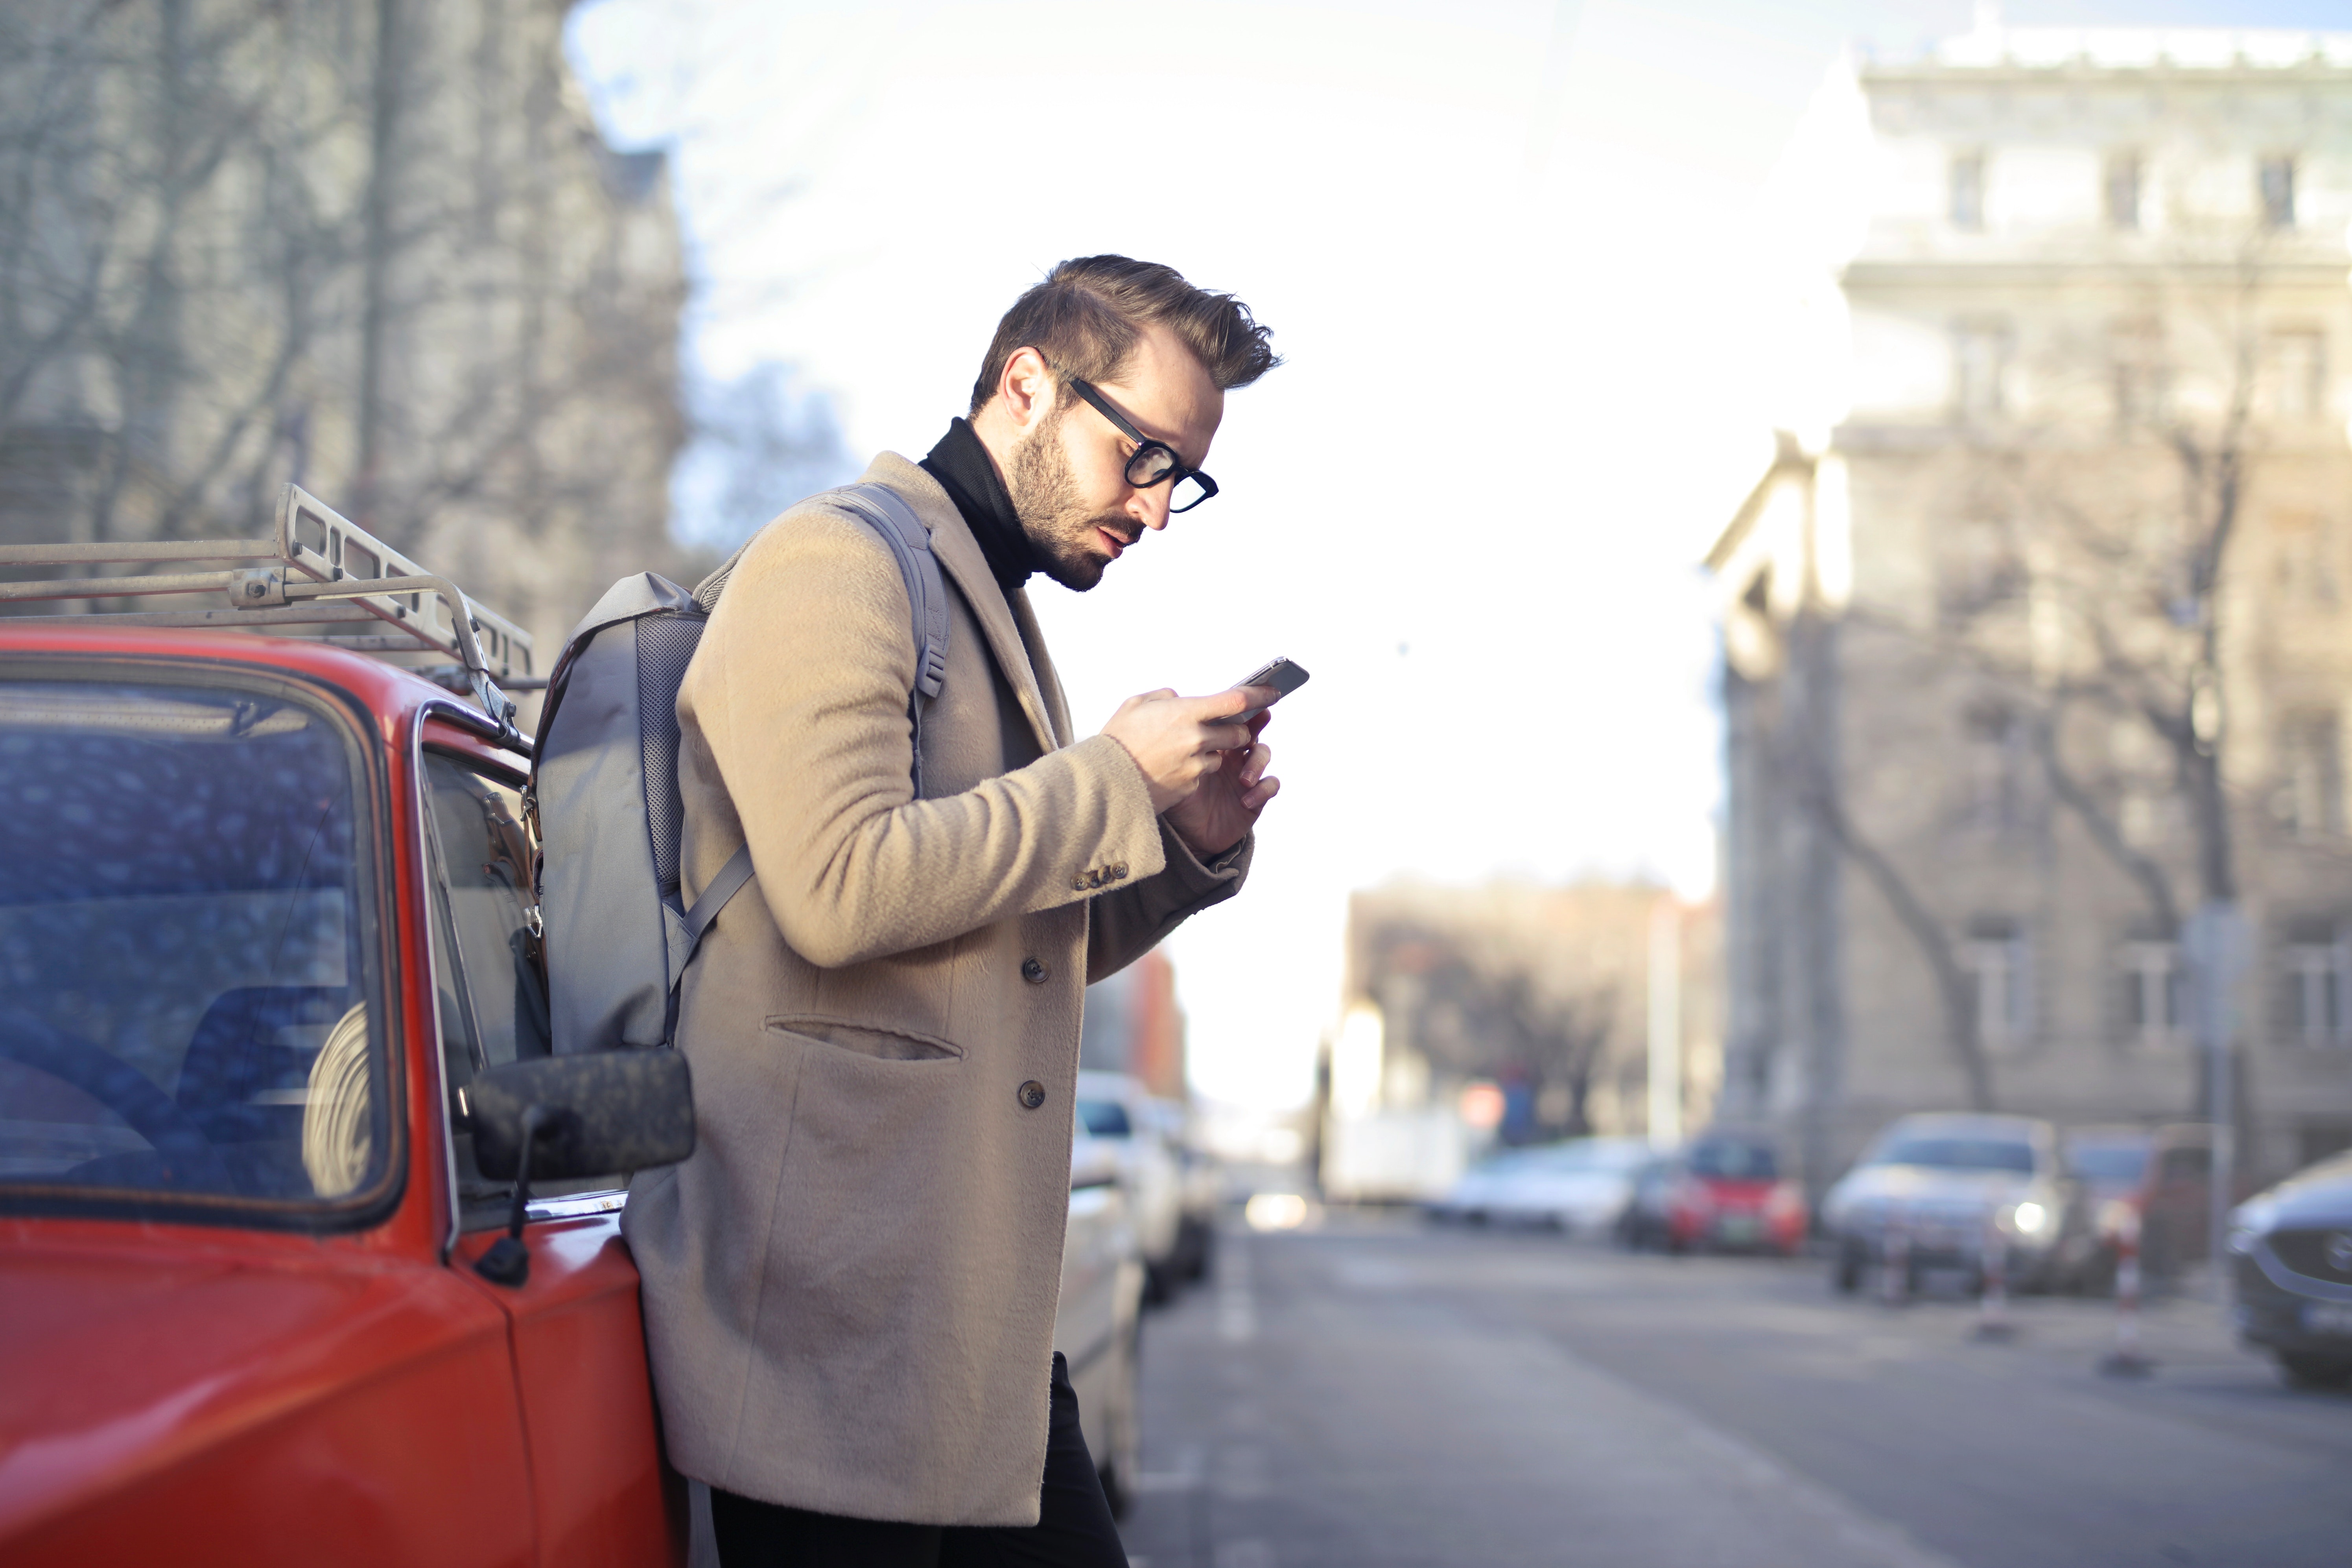 Man in beige coat holding phone leaning on red vehicle photo